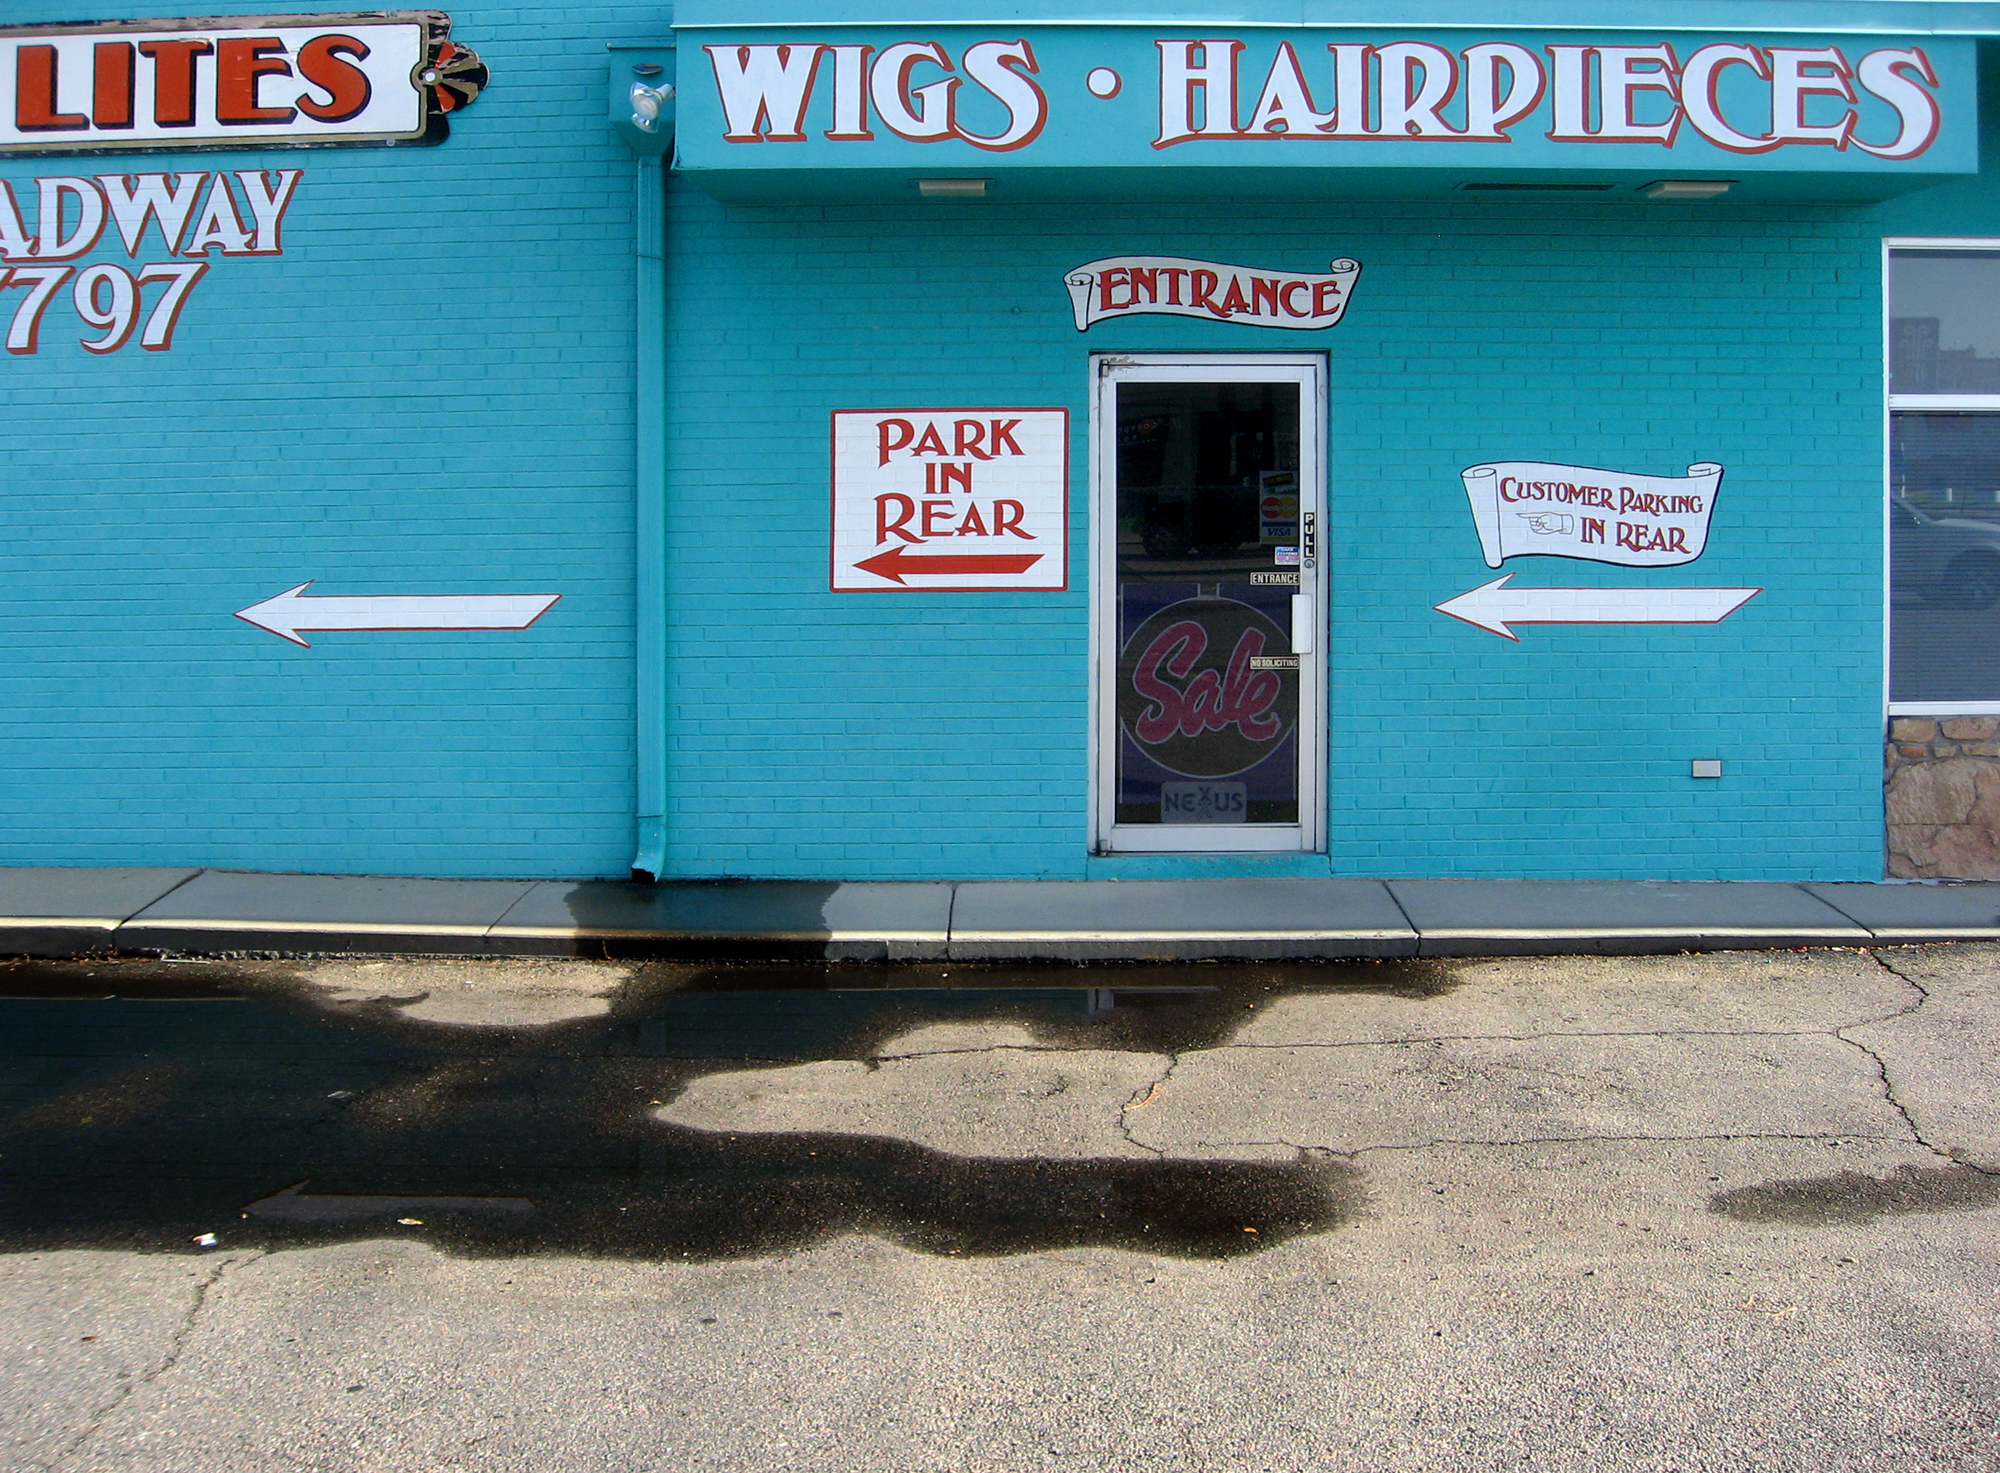 wigs hairpieces.jpg